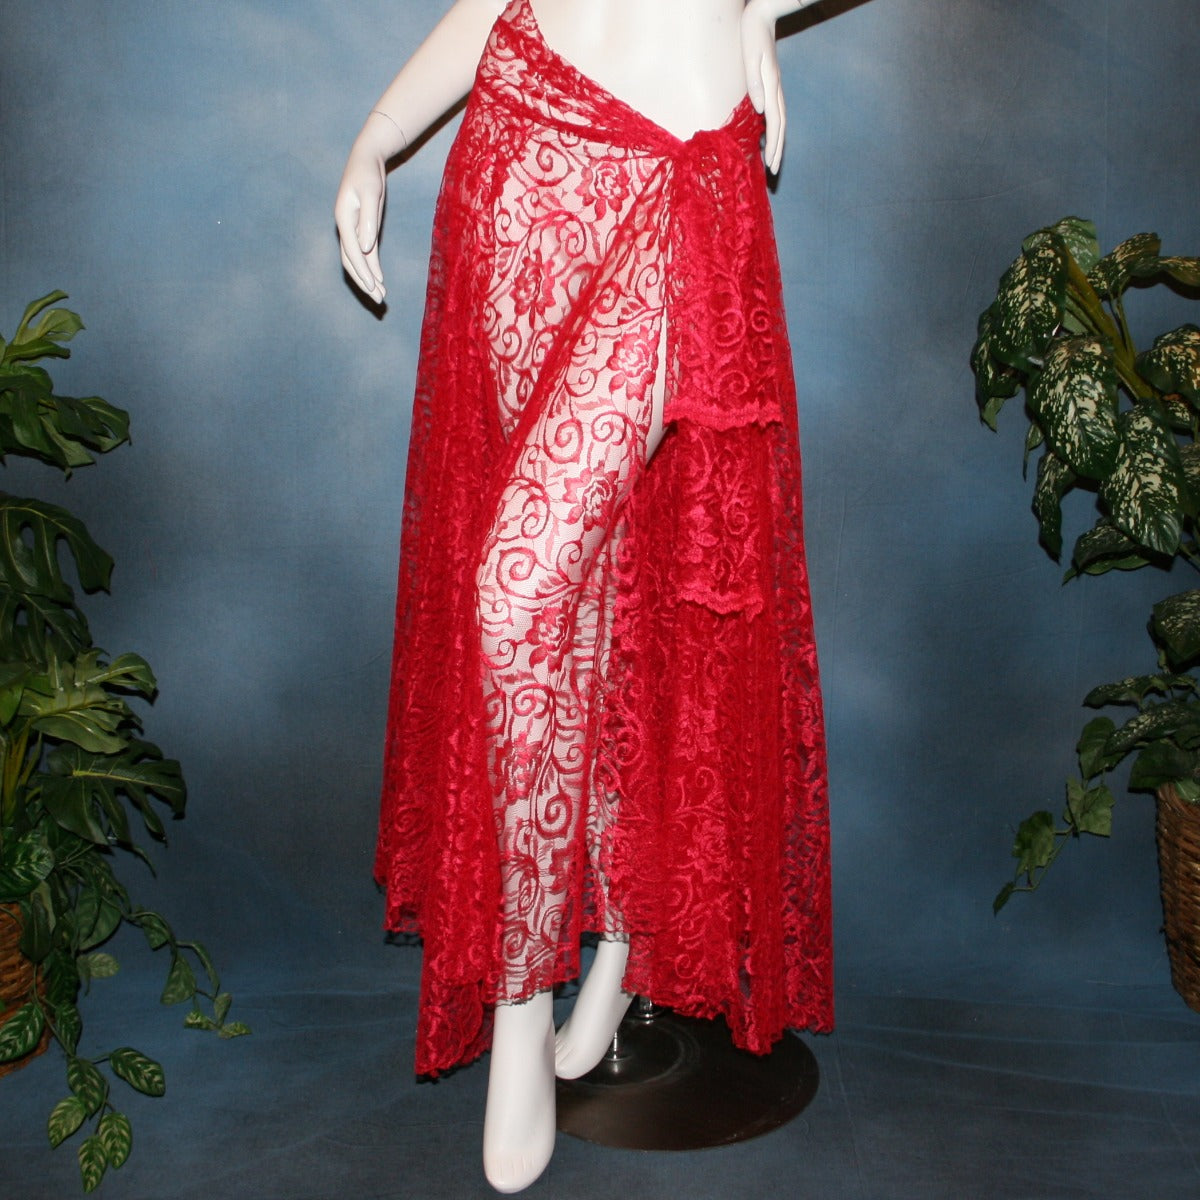 Red lace ballroom skirt, wrap style, was created with yards of red lace, many panels shaped like large petals.